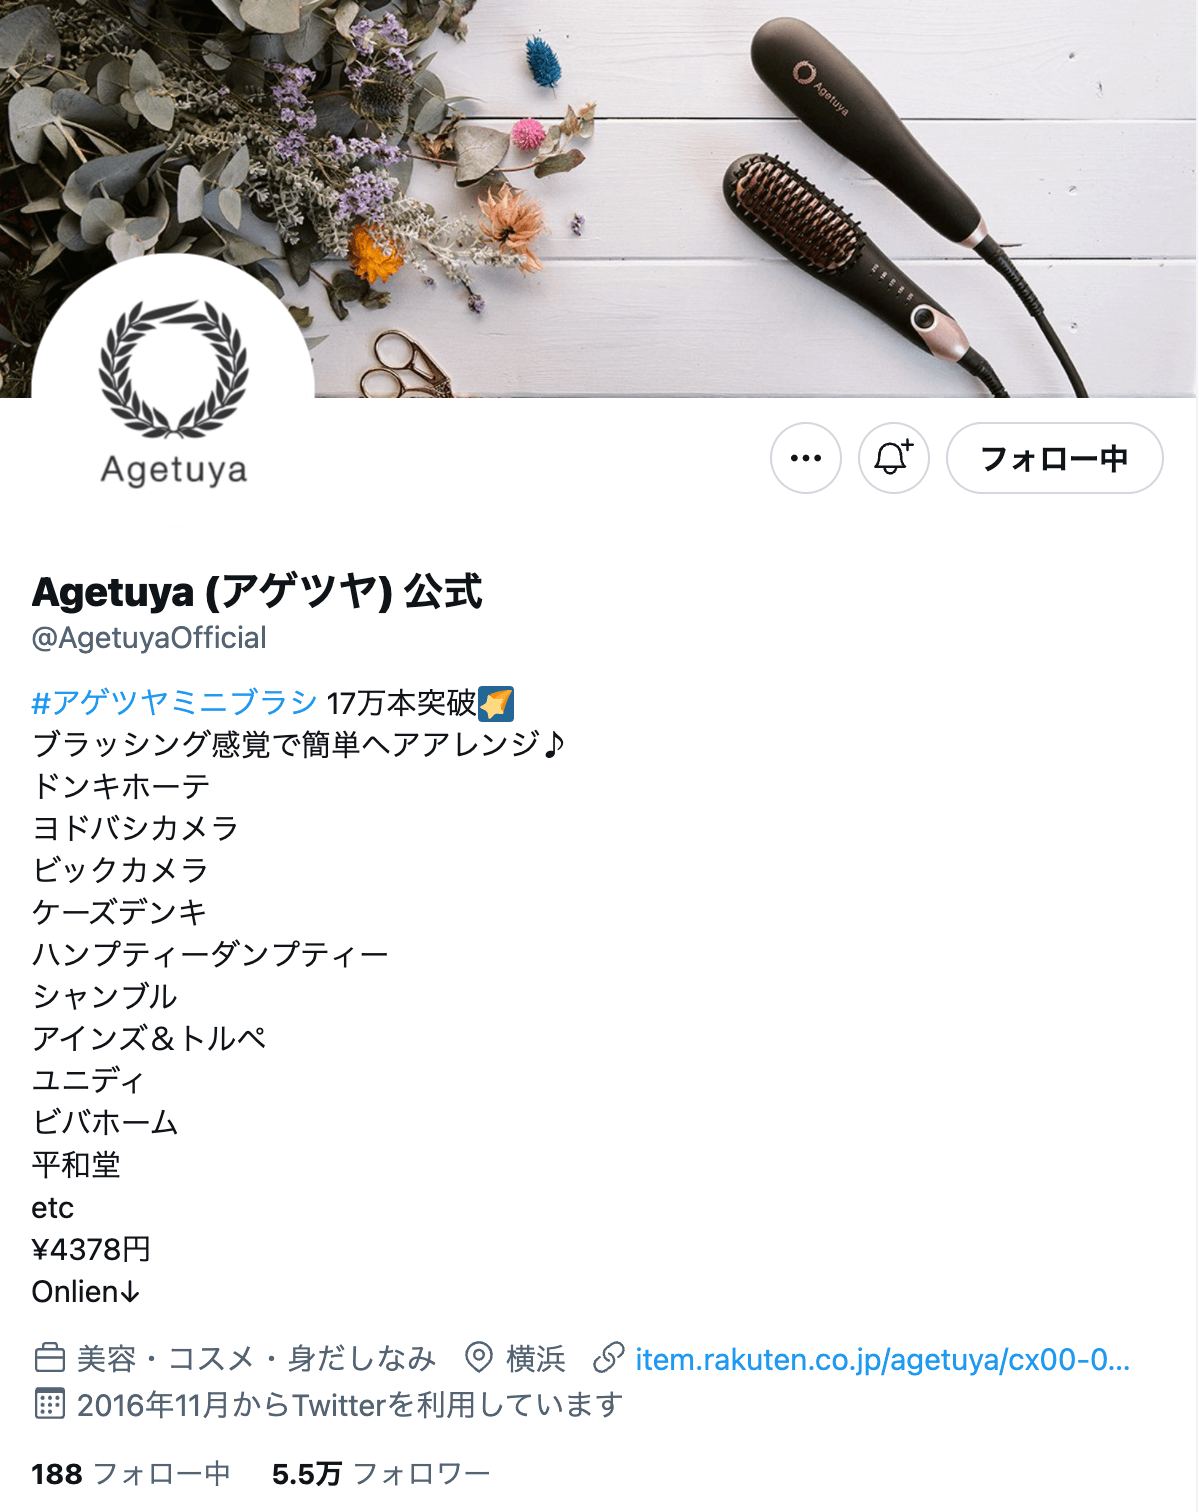 twitter-official-account-agetuyaofficial